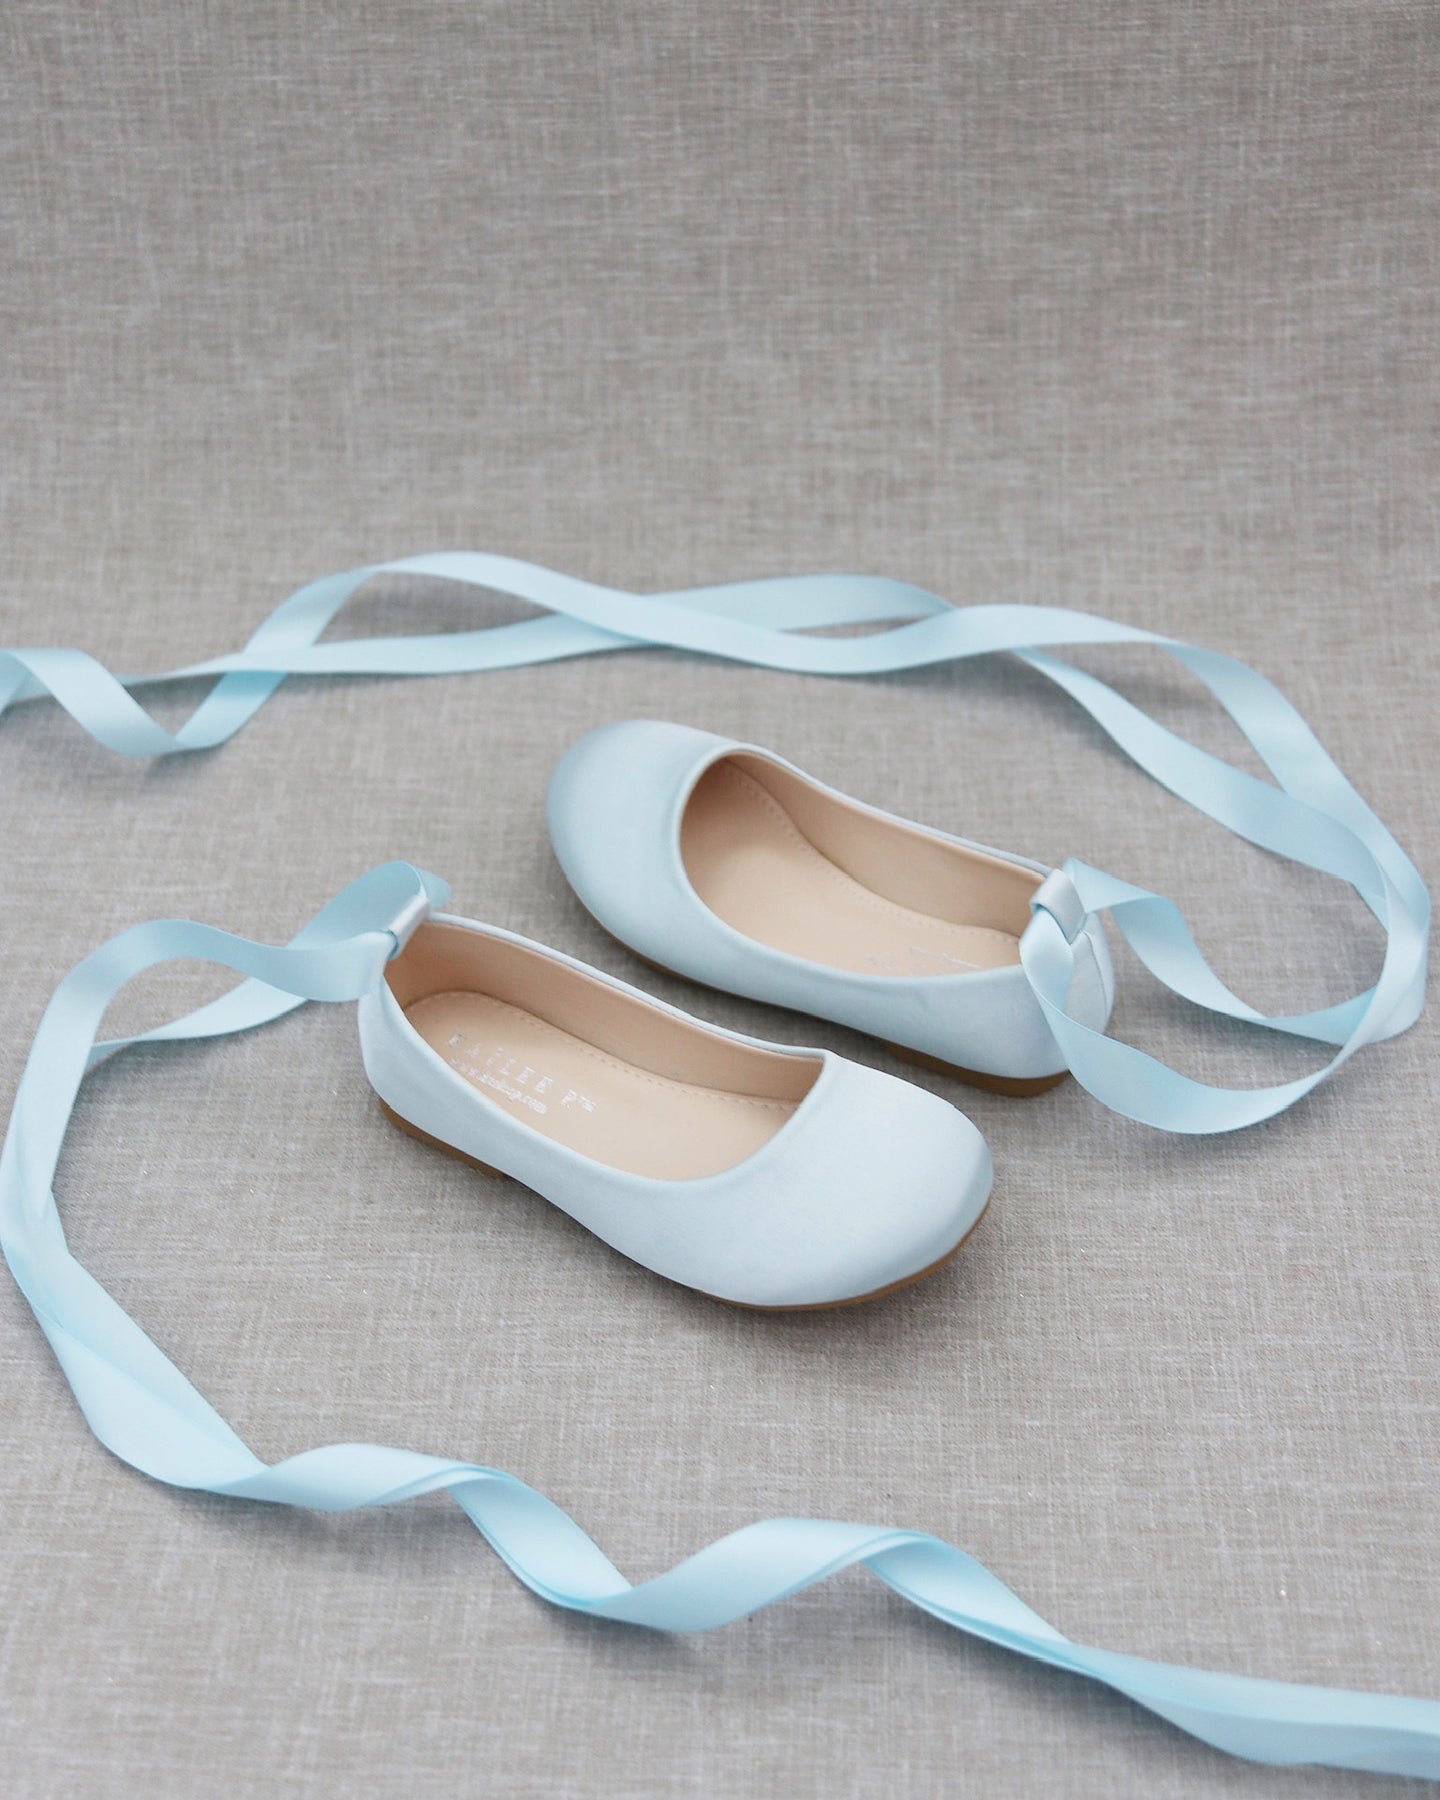 Light Blue Ankle Tie or Ballerina Lace Up Flats - Flower girls party shoes